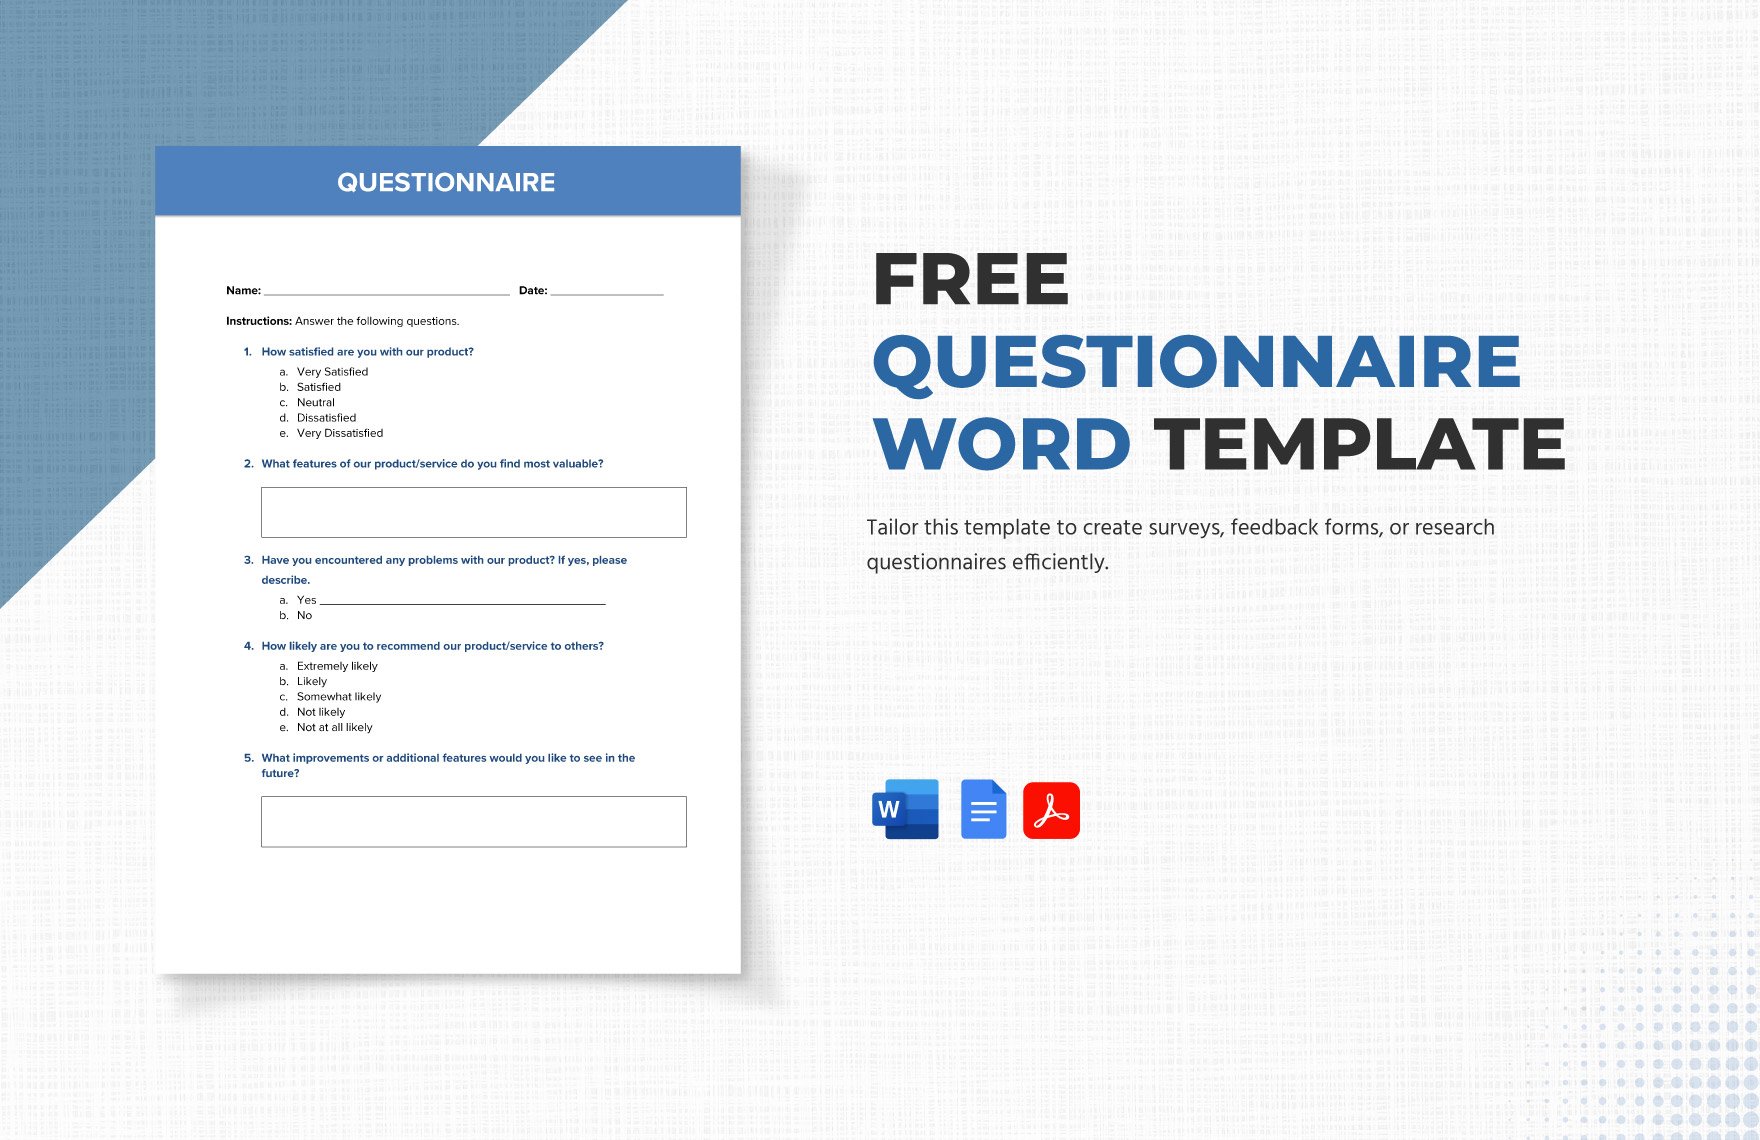 Free Questionnaire Word Template in Word, Google Docs, PDF